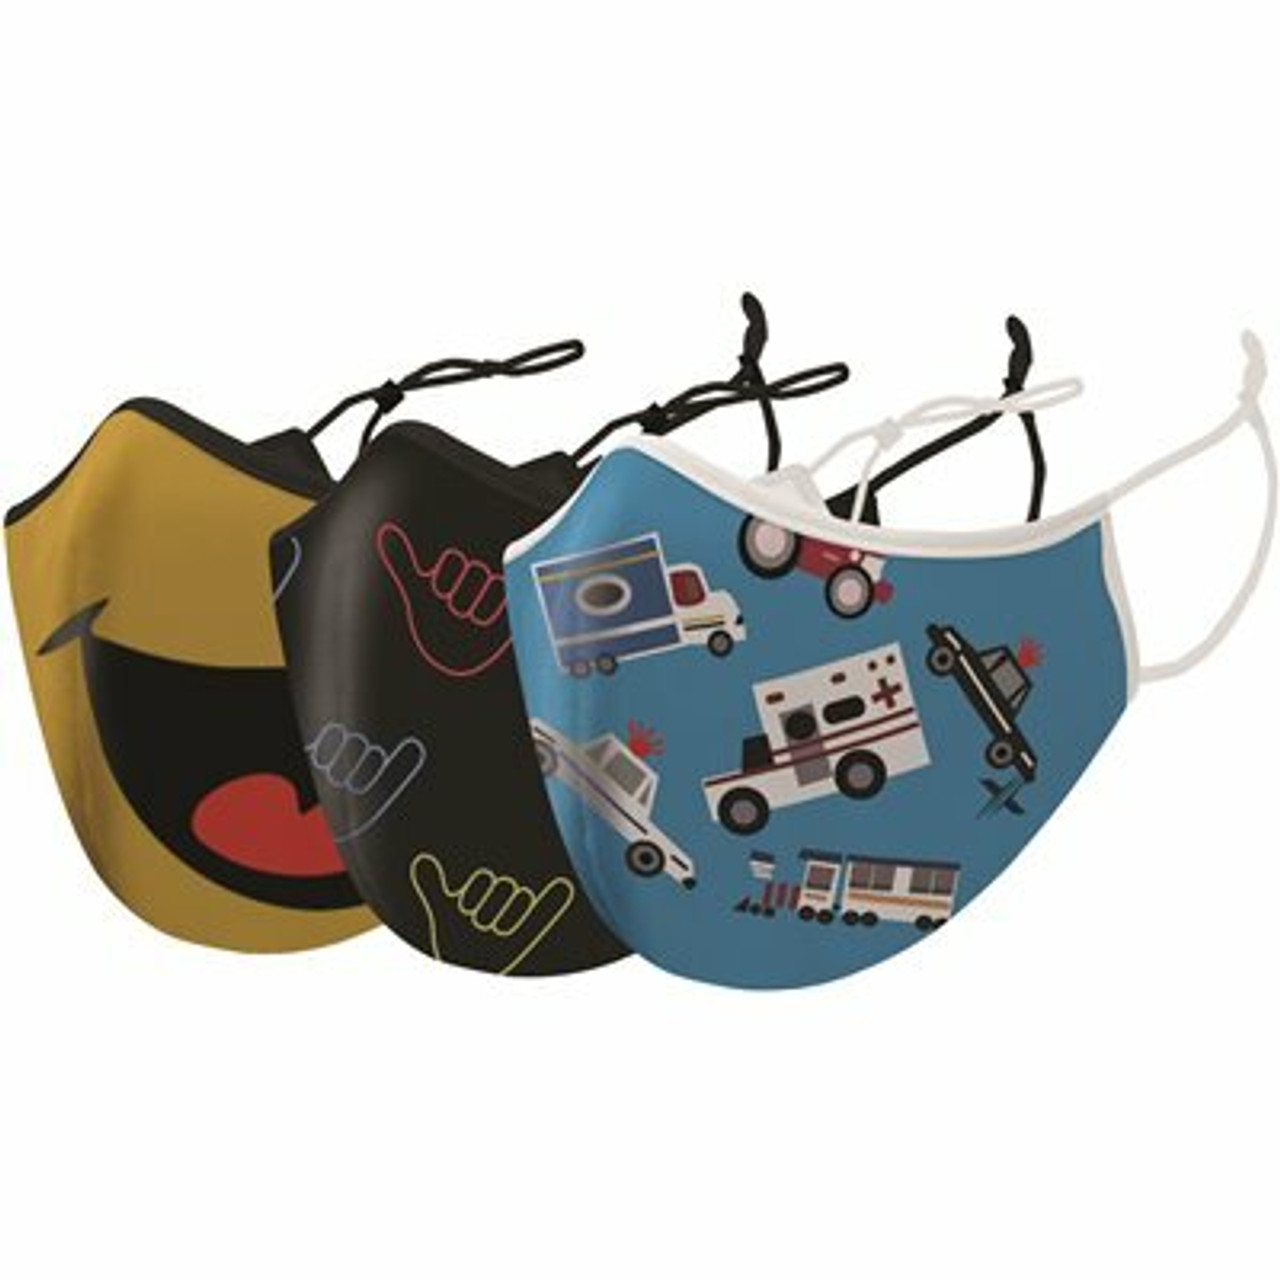 Two-Layer Reusable Kids Face Mask With Adjustable Earloop (3-Pack) - Case Of 4 (12 Total)